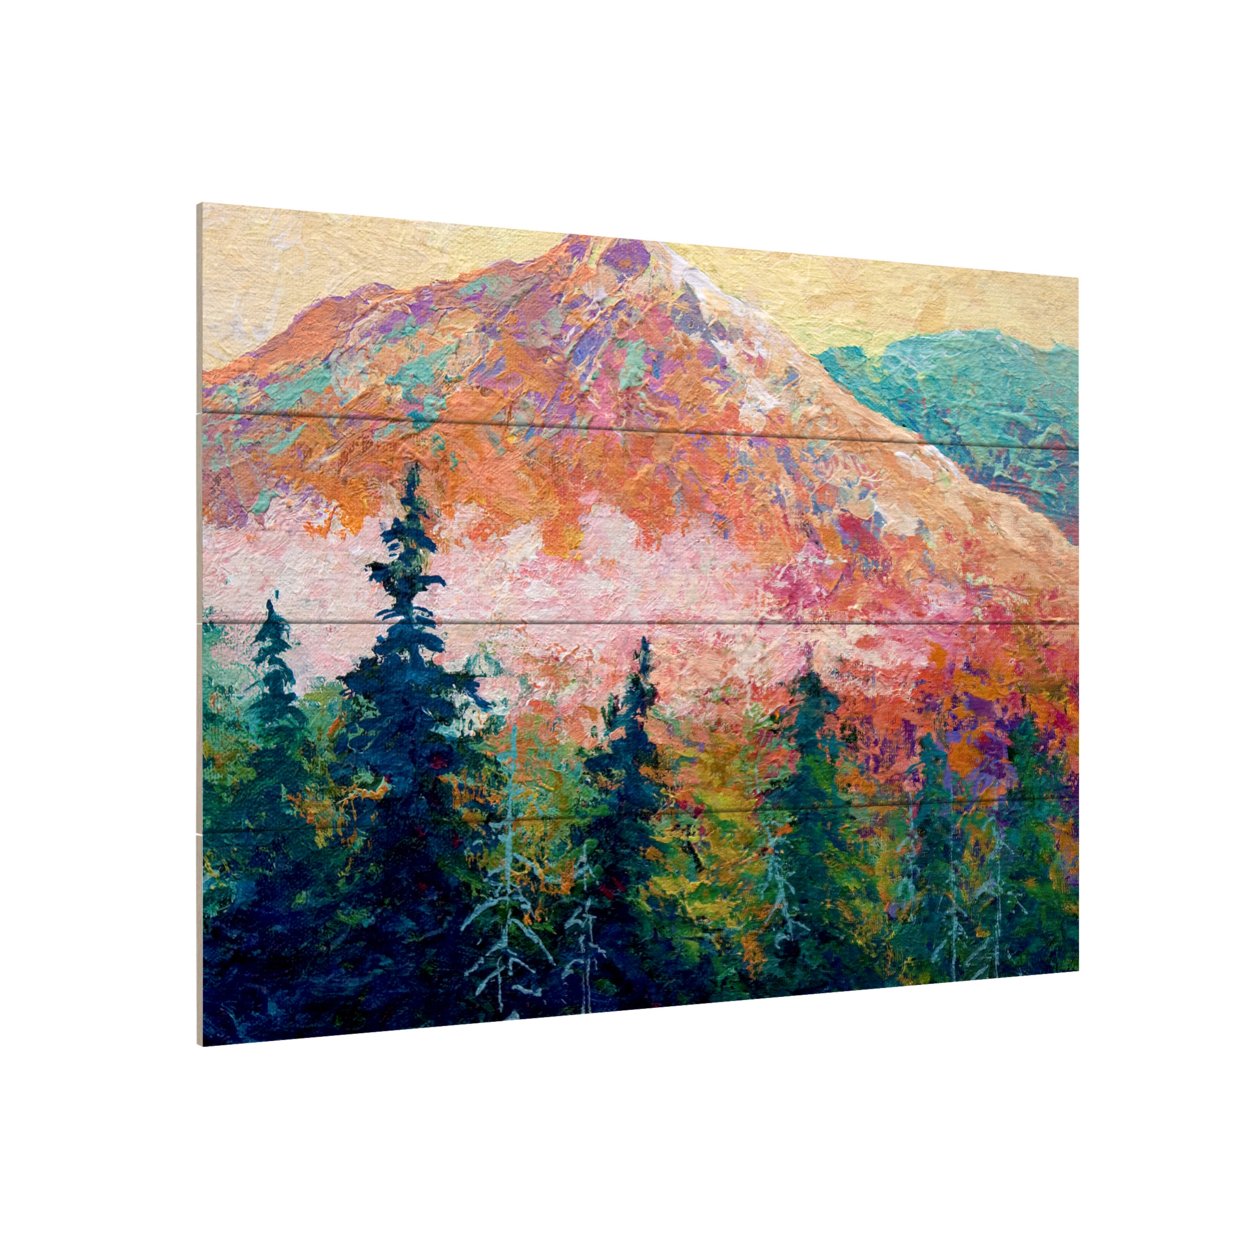 Wall Art 12 X 16 Inches Titled Mtn Sentinel Ready To Hang Printed On Wooden Planks